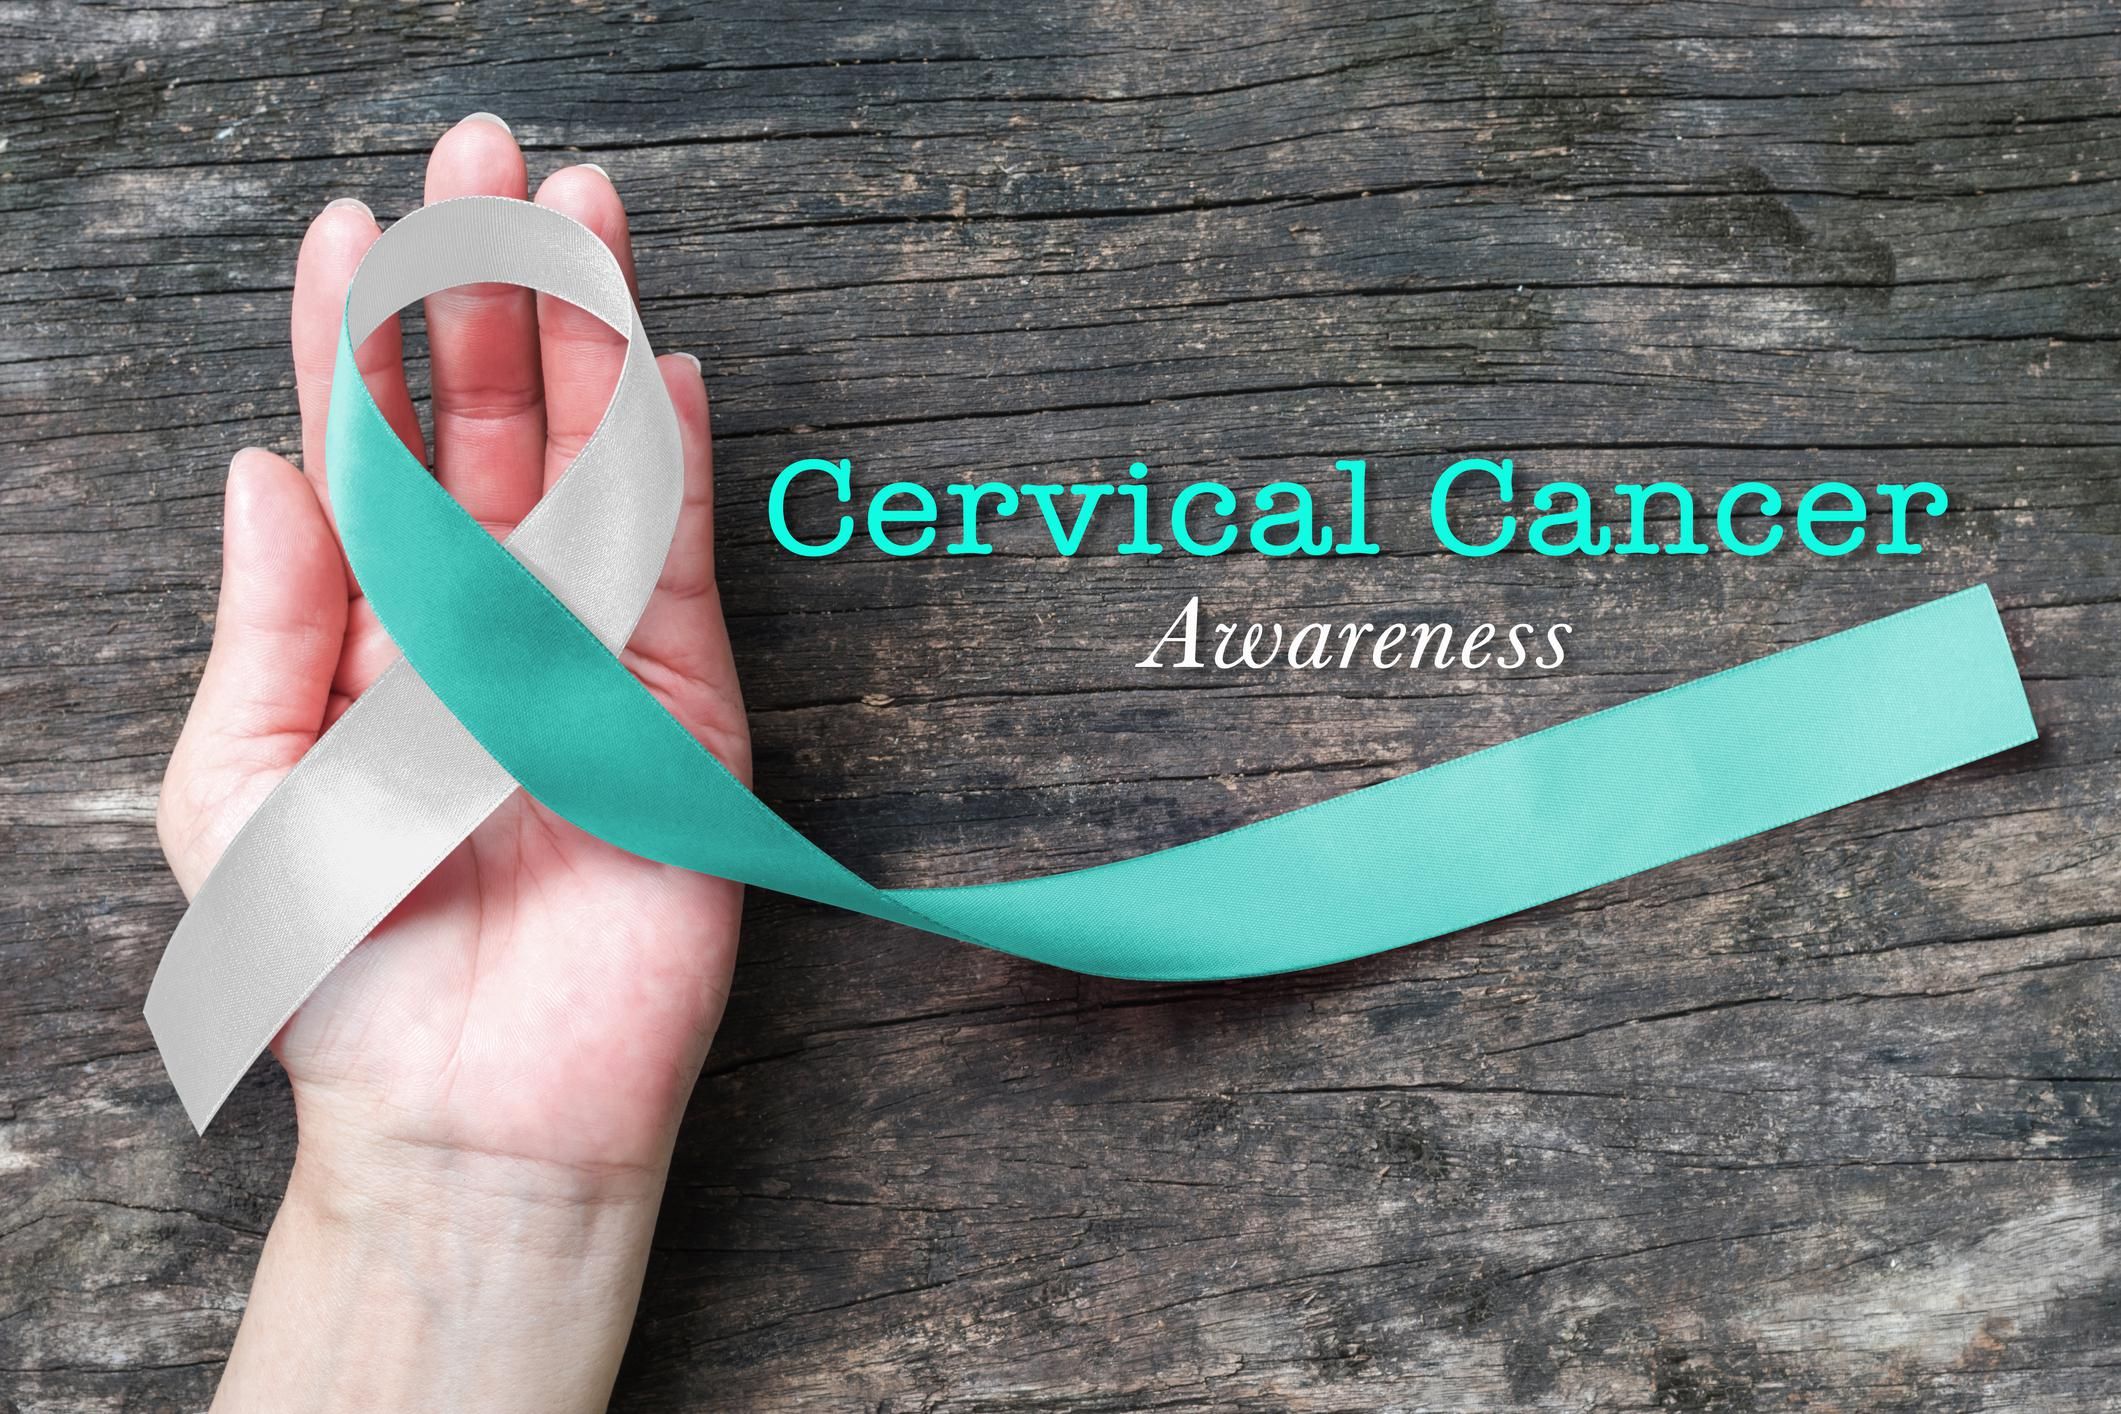 Cervical Cancer awareness with Teal and white ribbon symbolic bow color on woman helping hand support on old aged wood